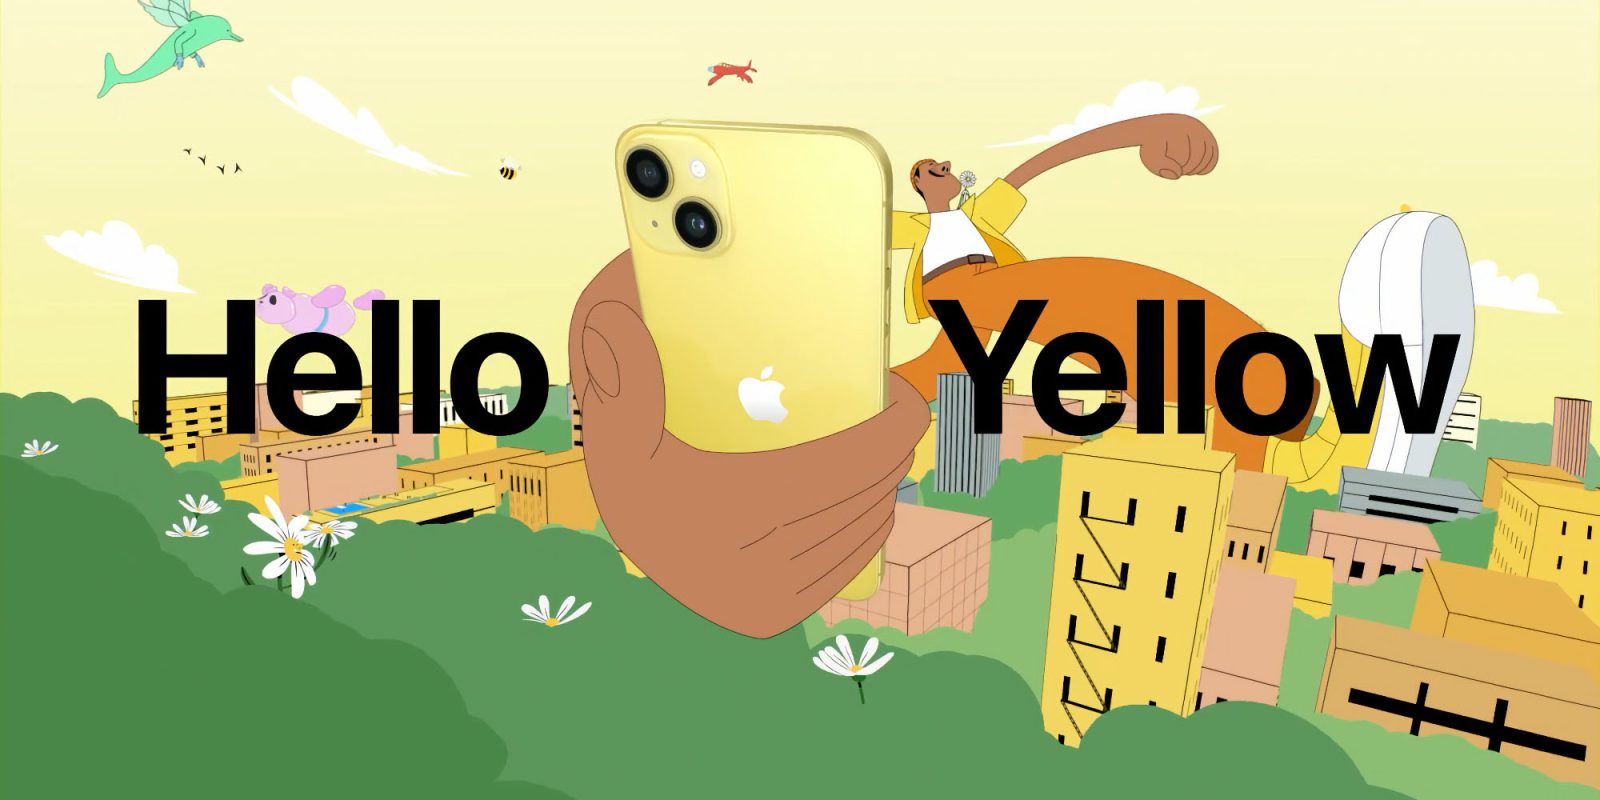 Apple celebrates yellow iPhone 14 launch with new ‘Hello Yellow’ ad [Video]